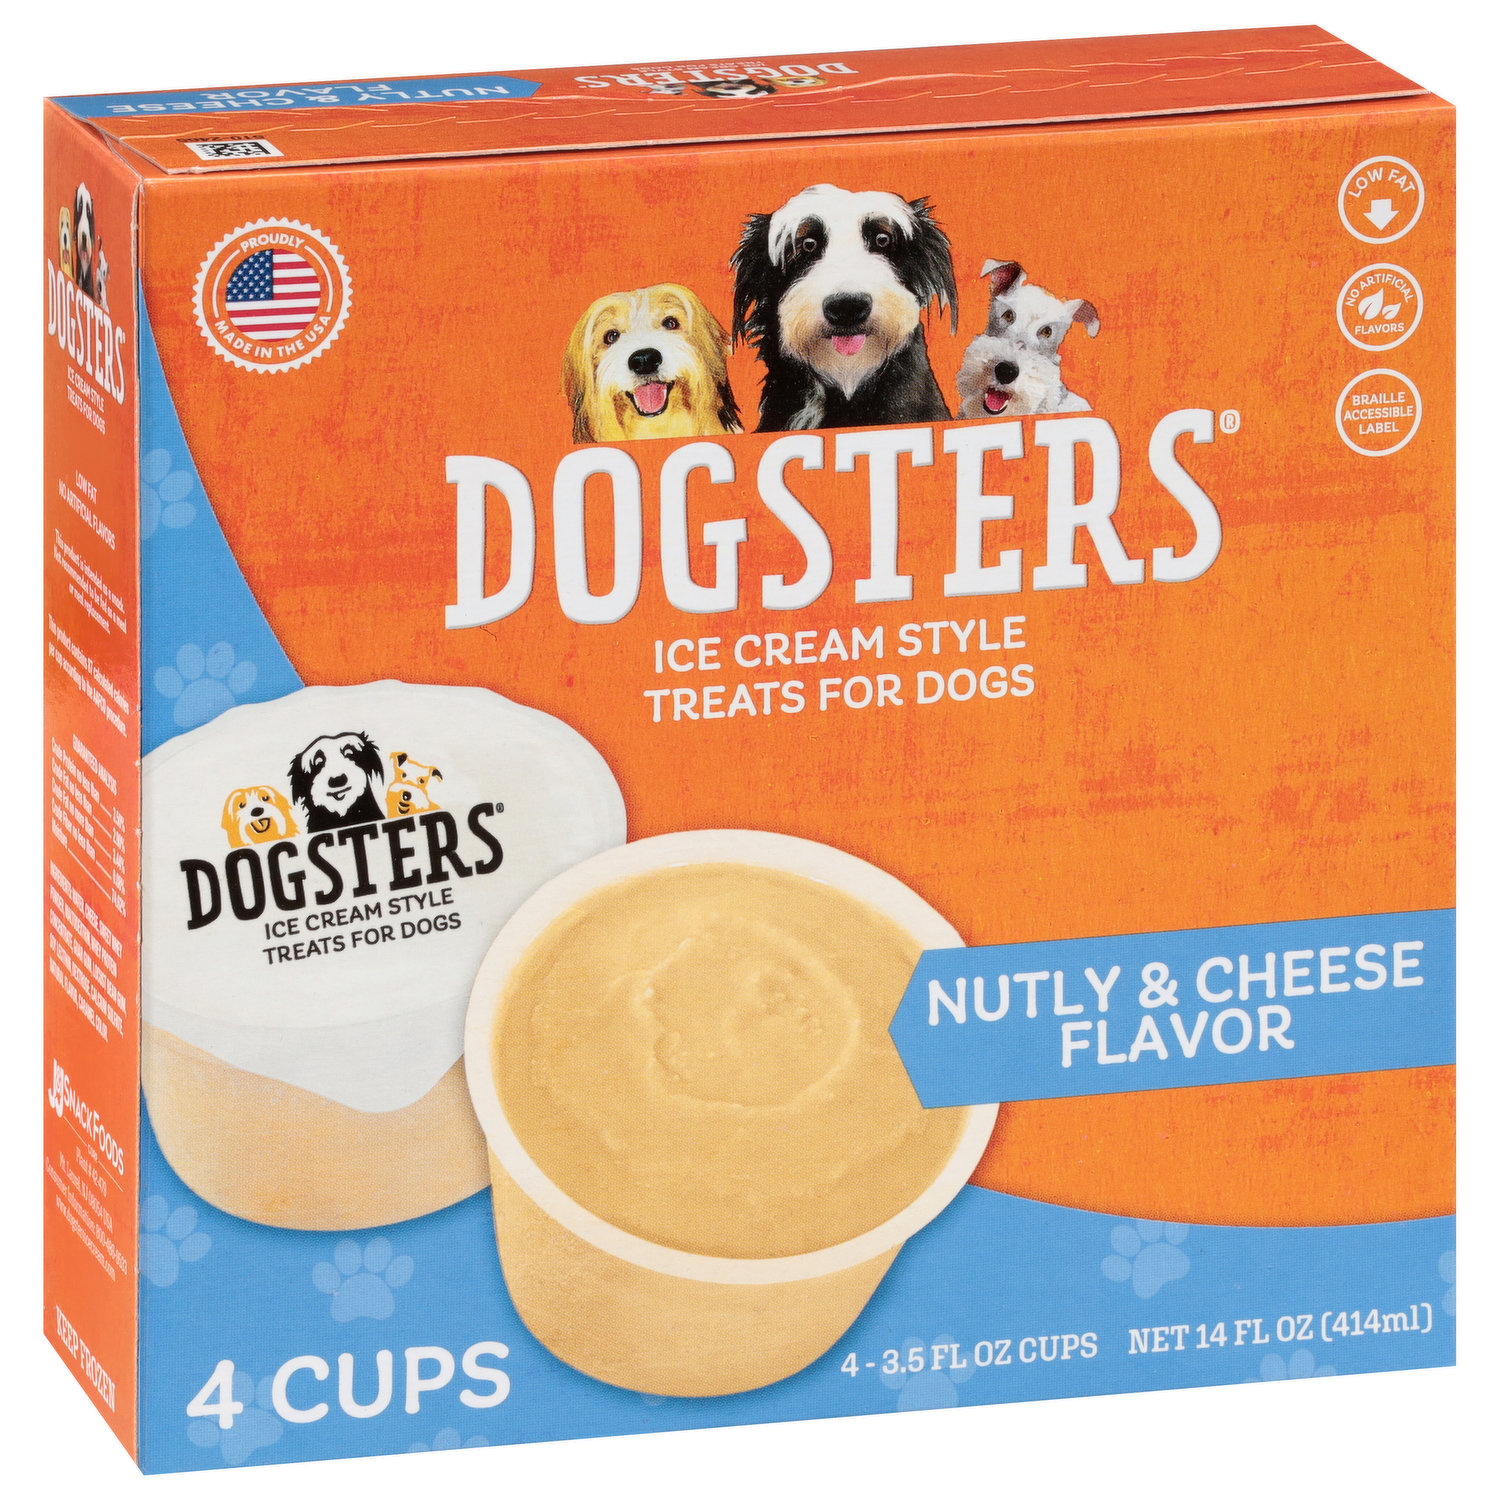 Doggy Ice Pops offers cold treats for hot dogs - Caplin News